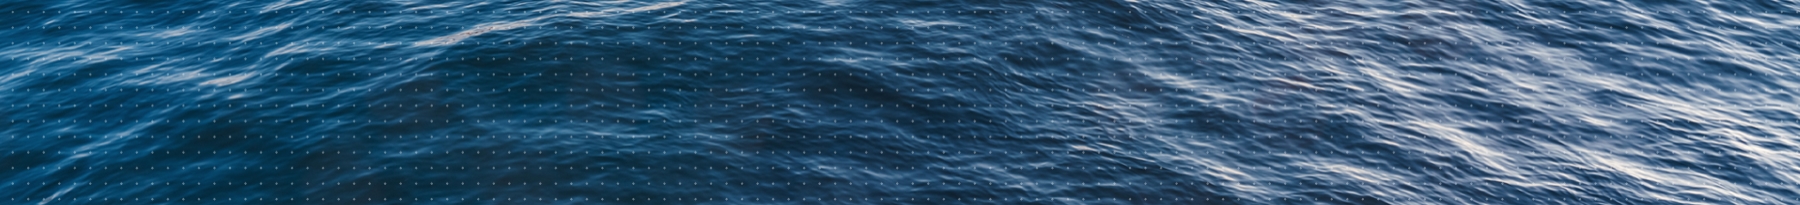 Photograph of water in the ocean